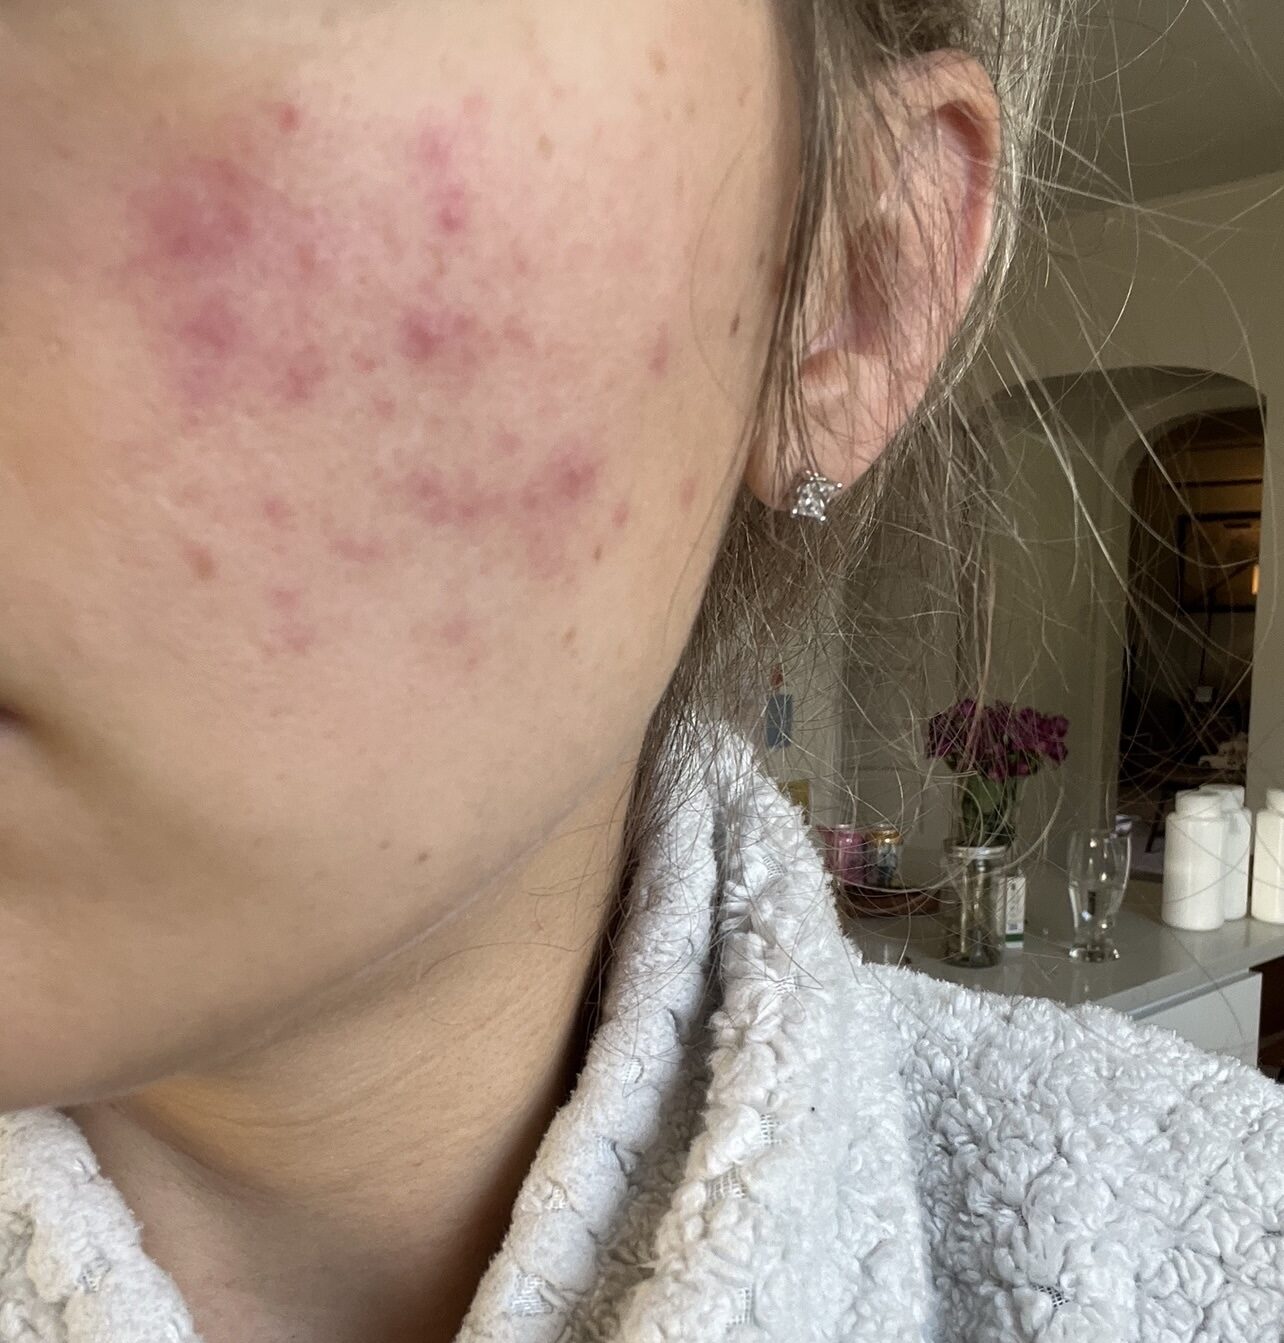 close up of spots and rash on face